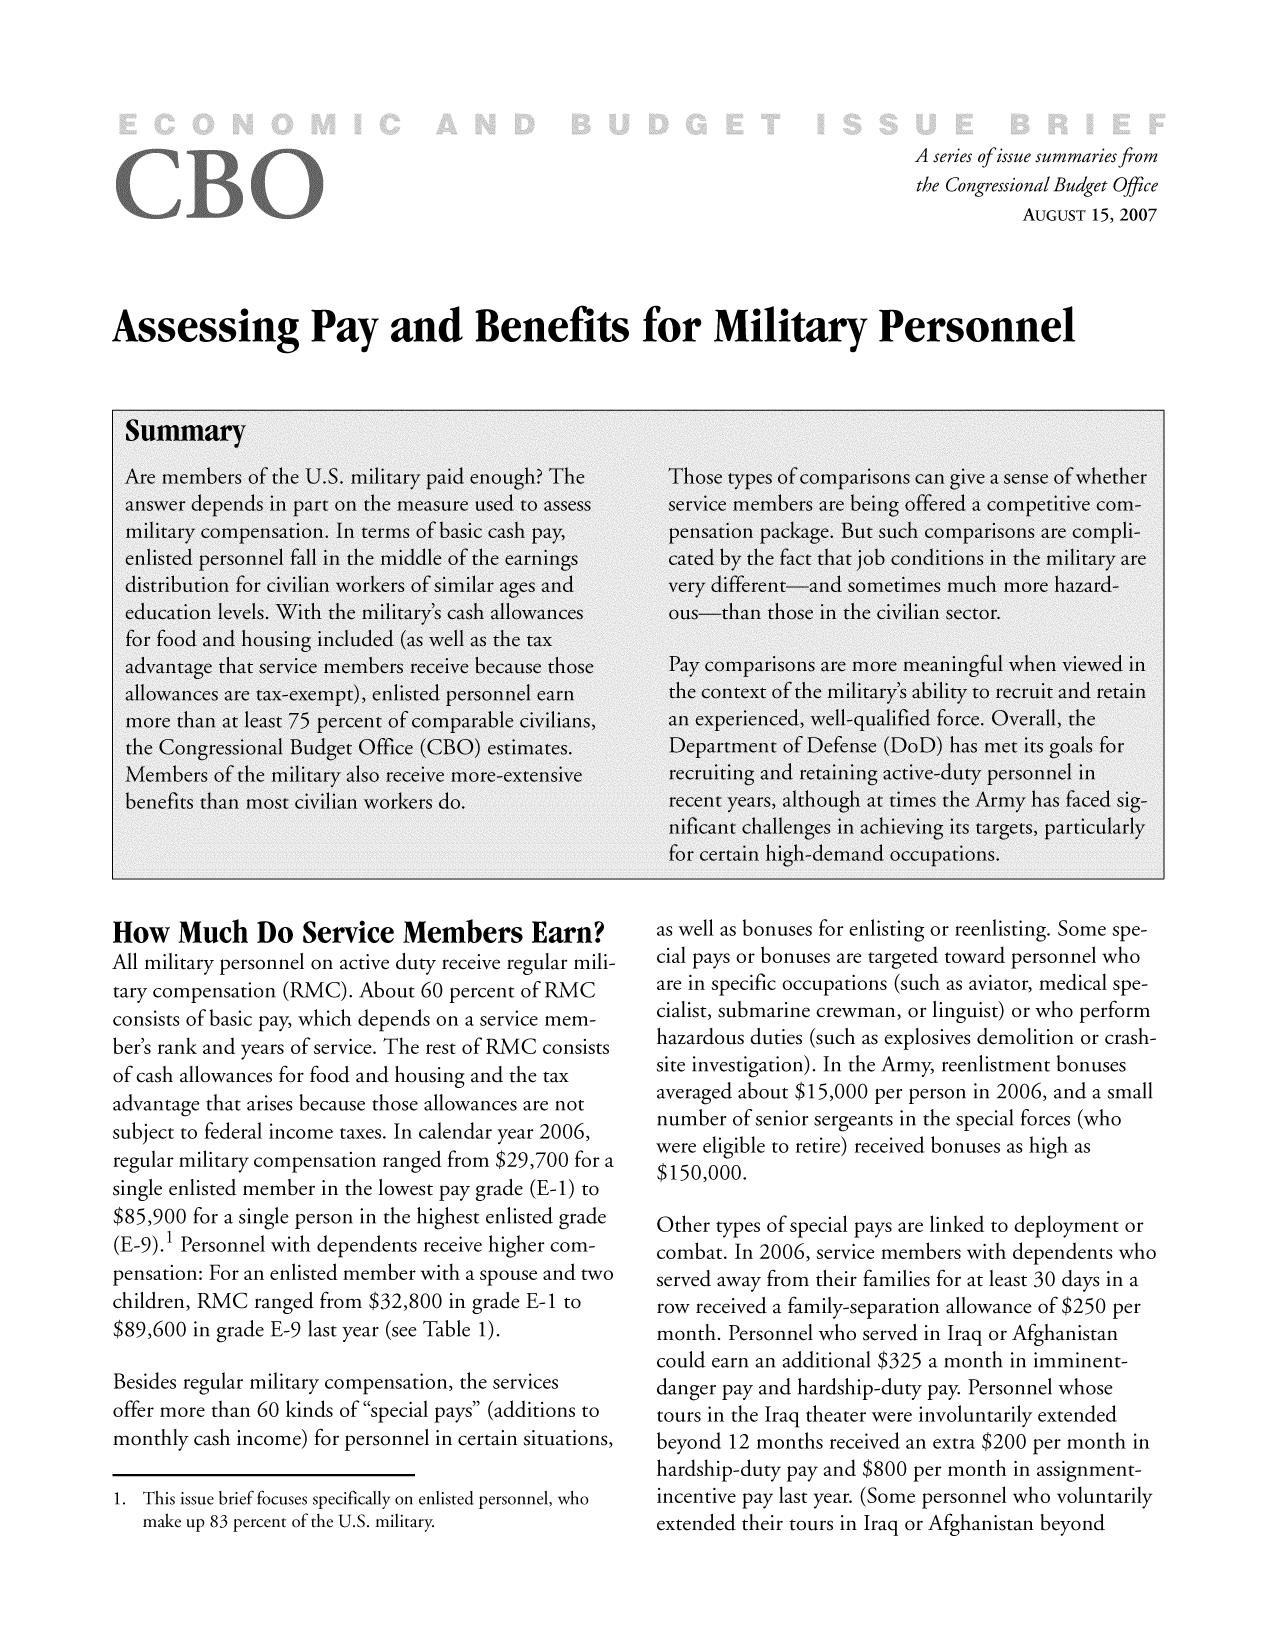 handle is hein.congrec/cbo9761 and id is 1 raw text is: A series ofissue summaries from
the Congressional Budget Office
AUGUST 15, 2007
Assessing Pay and Benefits for Military Personnel

How Much Do Service Members Earn?
All military personnel on active duty receive regular mili-
tary compensation (RMC). About 60 percent of RMC
consists of basic pay, which depends on a service mem-
ber's rank and years of service. The rest of RMC consists
of cash allowances for food and housing and the tax
advantage that arises because those allowances are not
subject to federal income taxes. In calendar year 2006,
regular military compensation ranged from $29,700 for a
single enlisted member in the lowest pay grade (E-1) to
$85,900 for a single person in the highest enlisted grade
(E-9).1 Personnel with dependents receive higher com-
pensation: For an enlisted member with a spouse and two
children, RMC ranged from $32,800 in grade E-1 to
$89,600 in grade E-9 last year (see Table 1).
Besides regular military compensation, the services
offer more than 60 kinds of special pays (additions to
monthly cash income) for personnel in certain situations,
1. This issue brief focuses specifically on enlisted personnel, who
make up 83 percent of the U.S. military.

as well as bonuses for enlisting or reenlisting. Some spe-
cial pays or bonuses are targeted toward personnel who
are in specific occupations (such as aviator, medical spe-
cialist, submarine crewman, or linguist) or who perform
hazardous duties (such as explosives demolition or crash-
site investigation). In the Army, reenlistment bonuses
averaged about $15,000 per person in 2006, and a small
number of senior sergeants in the special forces (who
were eligible to retire) received bonuses as high as
$150,000.
Other types of special pays are linked to deployment or
combat. In 2006, service members with dependents who
served away from their families for at least 30 days in a
row received a family-separation allowance of $250 per
month. Personnel who served in Iraq or Afghanistan
could earn an additional $325 a month in imminent-
danger pay and hardship-duty pay. Personnel whose
tours in the Iraq theater were involuntarily extended
beyond 12 months received an extra $200 per month in
hardship-duty pay and $800 per month in assignment-
incentive pay last year. (Some personnel who voluntarily
extended their tours in Iraq or Afghanistan beyond


